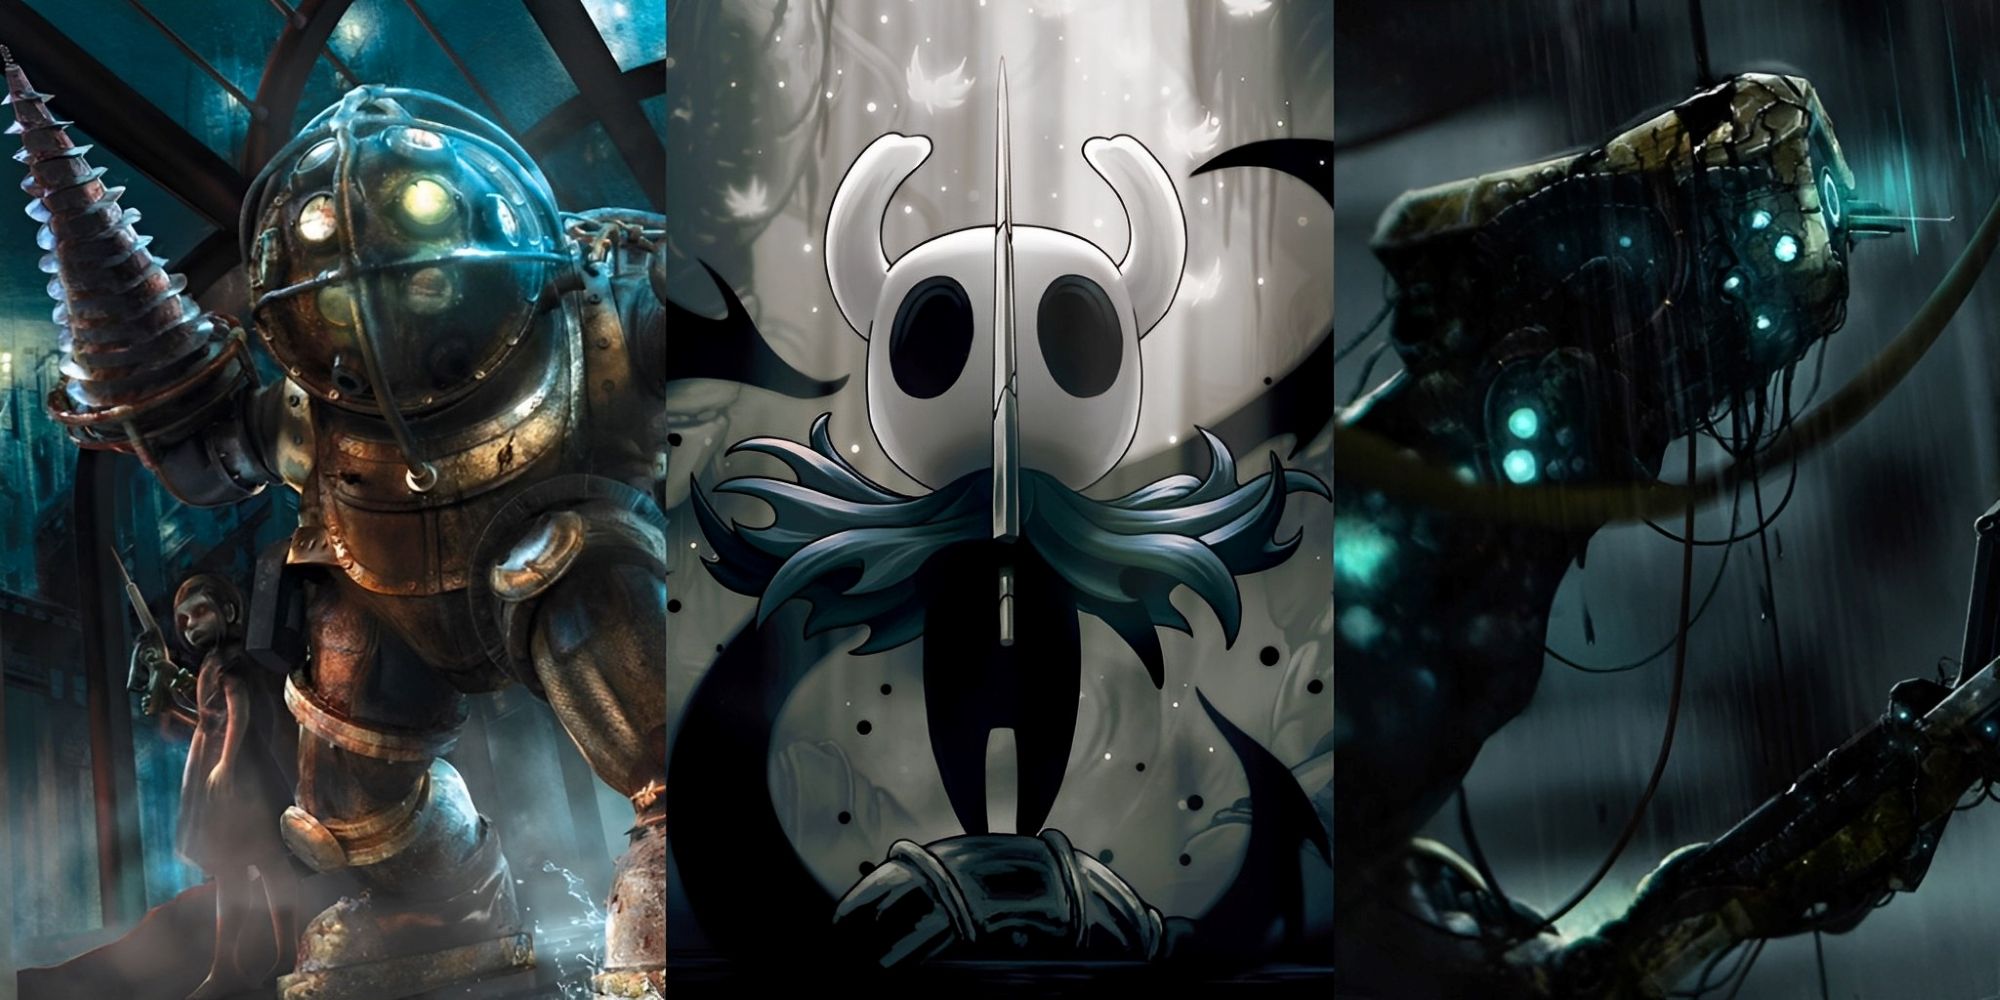 A split image with characters from Bioshock, Hollow Knight, and Soma